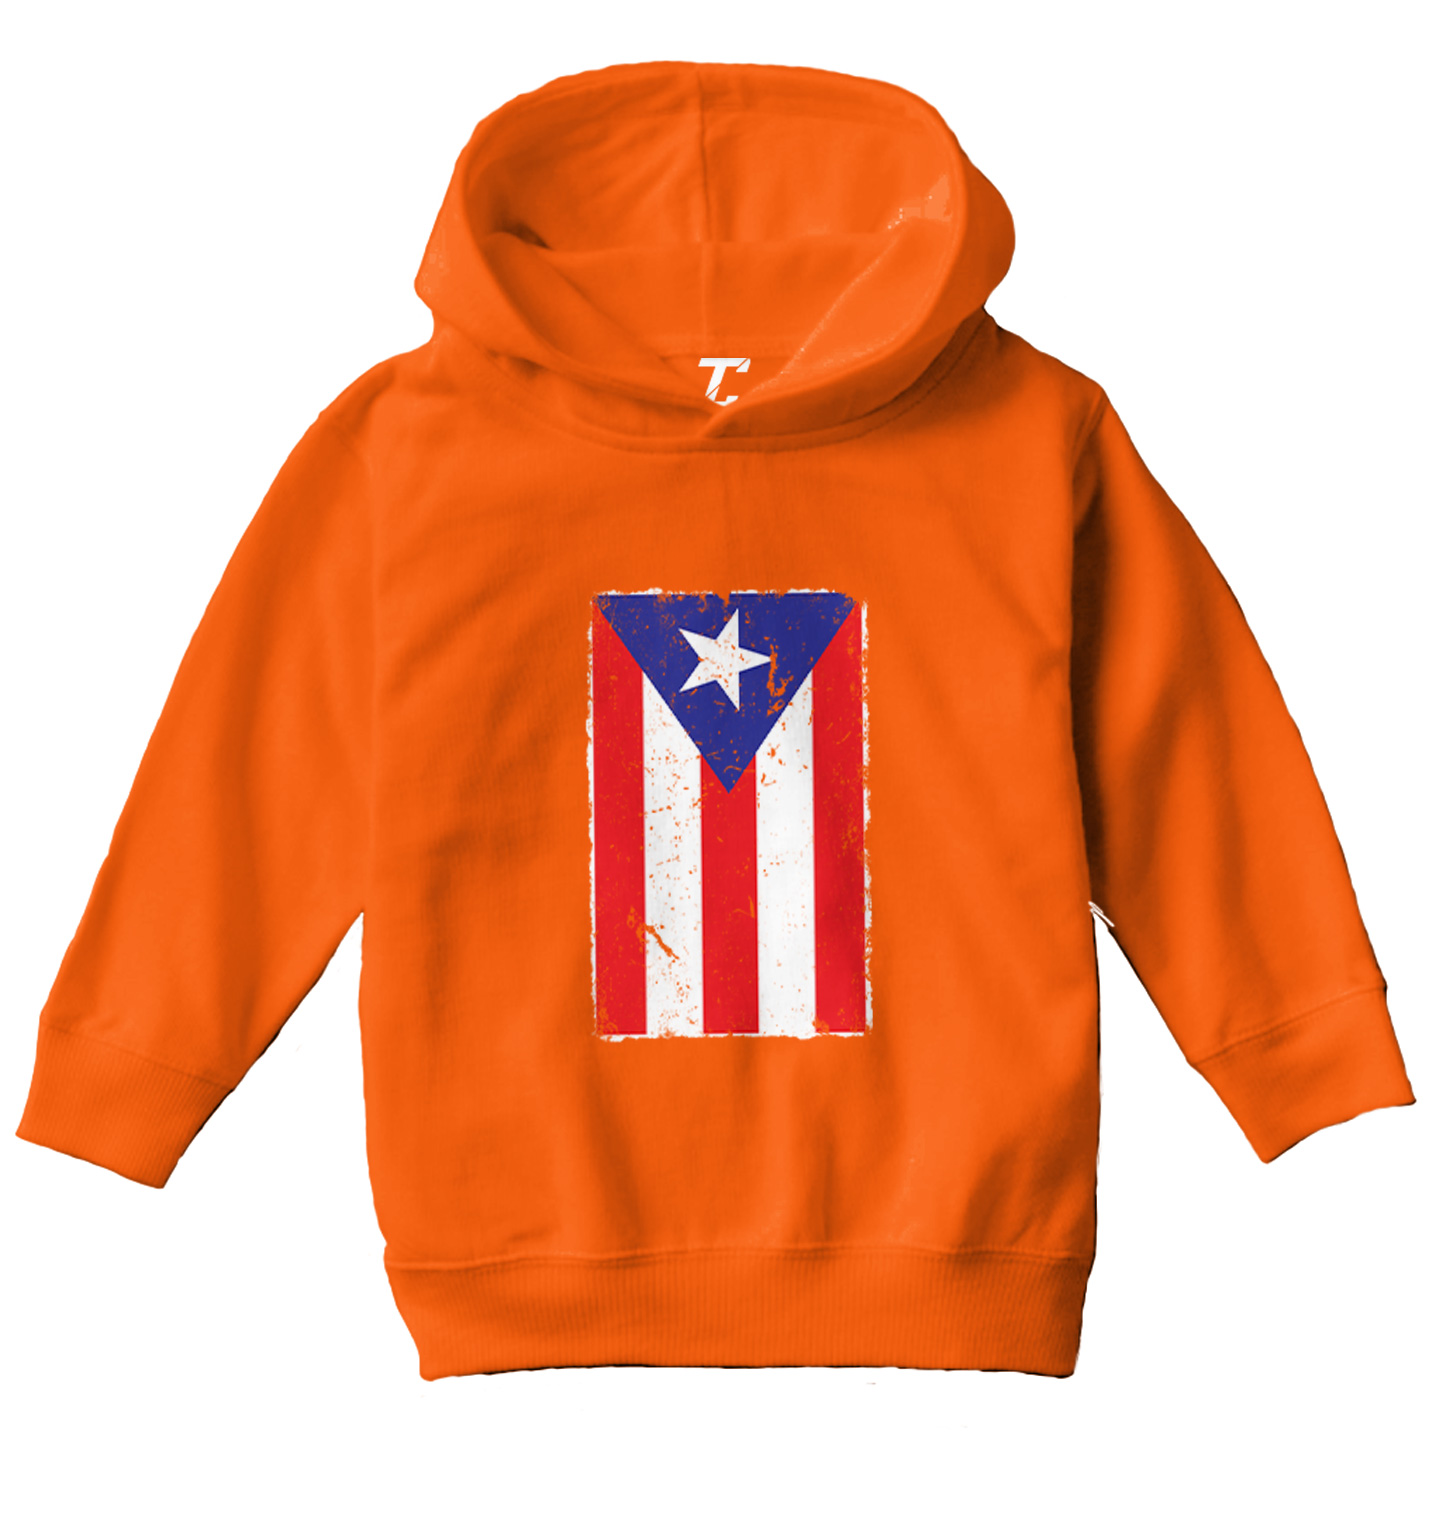 Strong Puerto Rican Distressed Pride Flag PR Youth Hooded Pullover Sweatshirts 